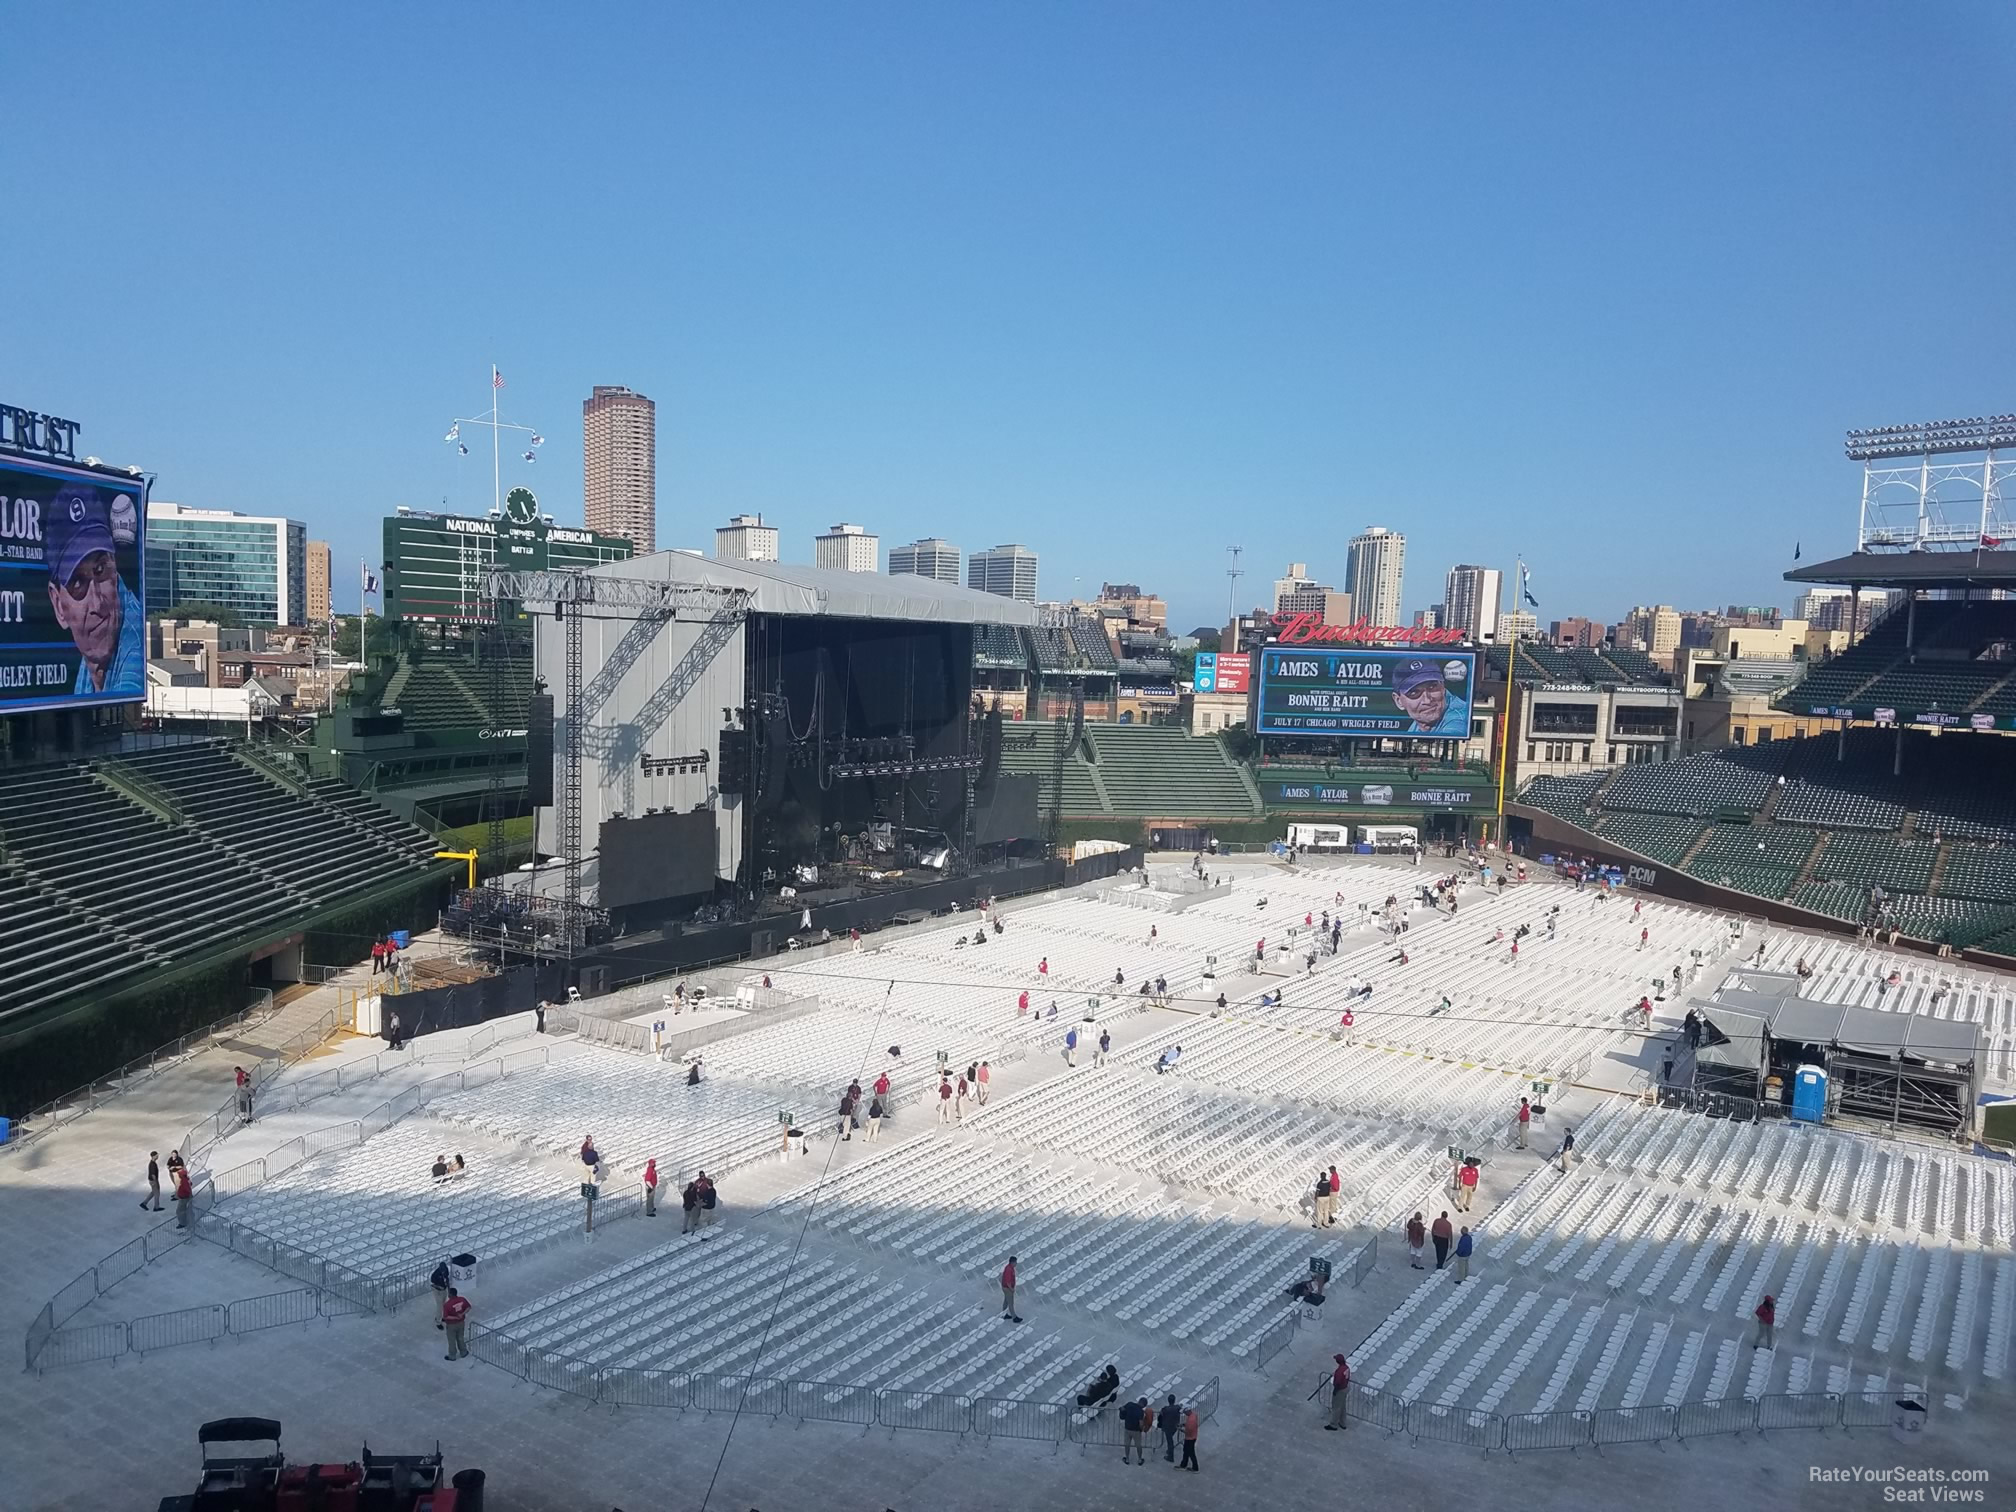 section 306, row 7 seat view  for concert - wrigley field